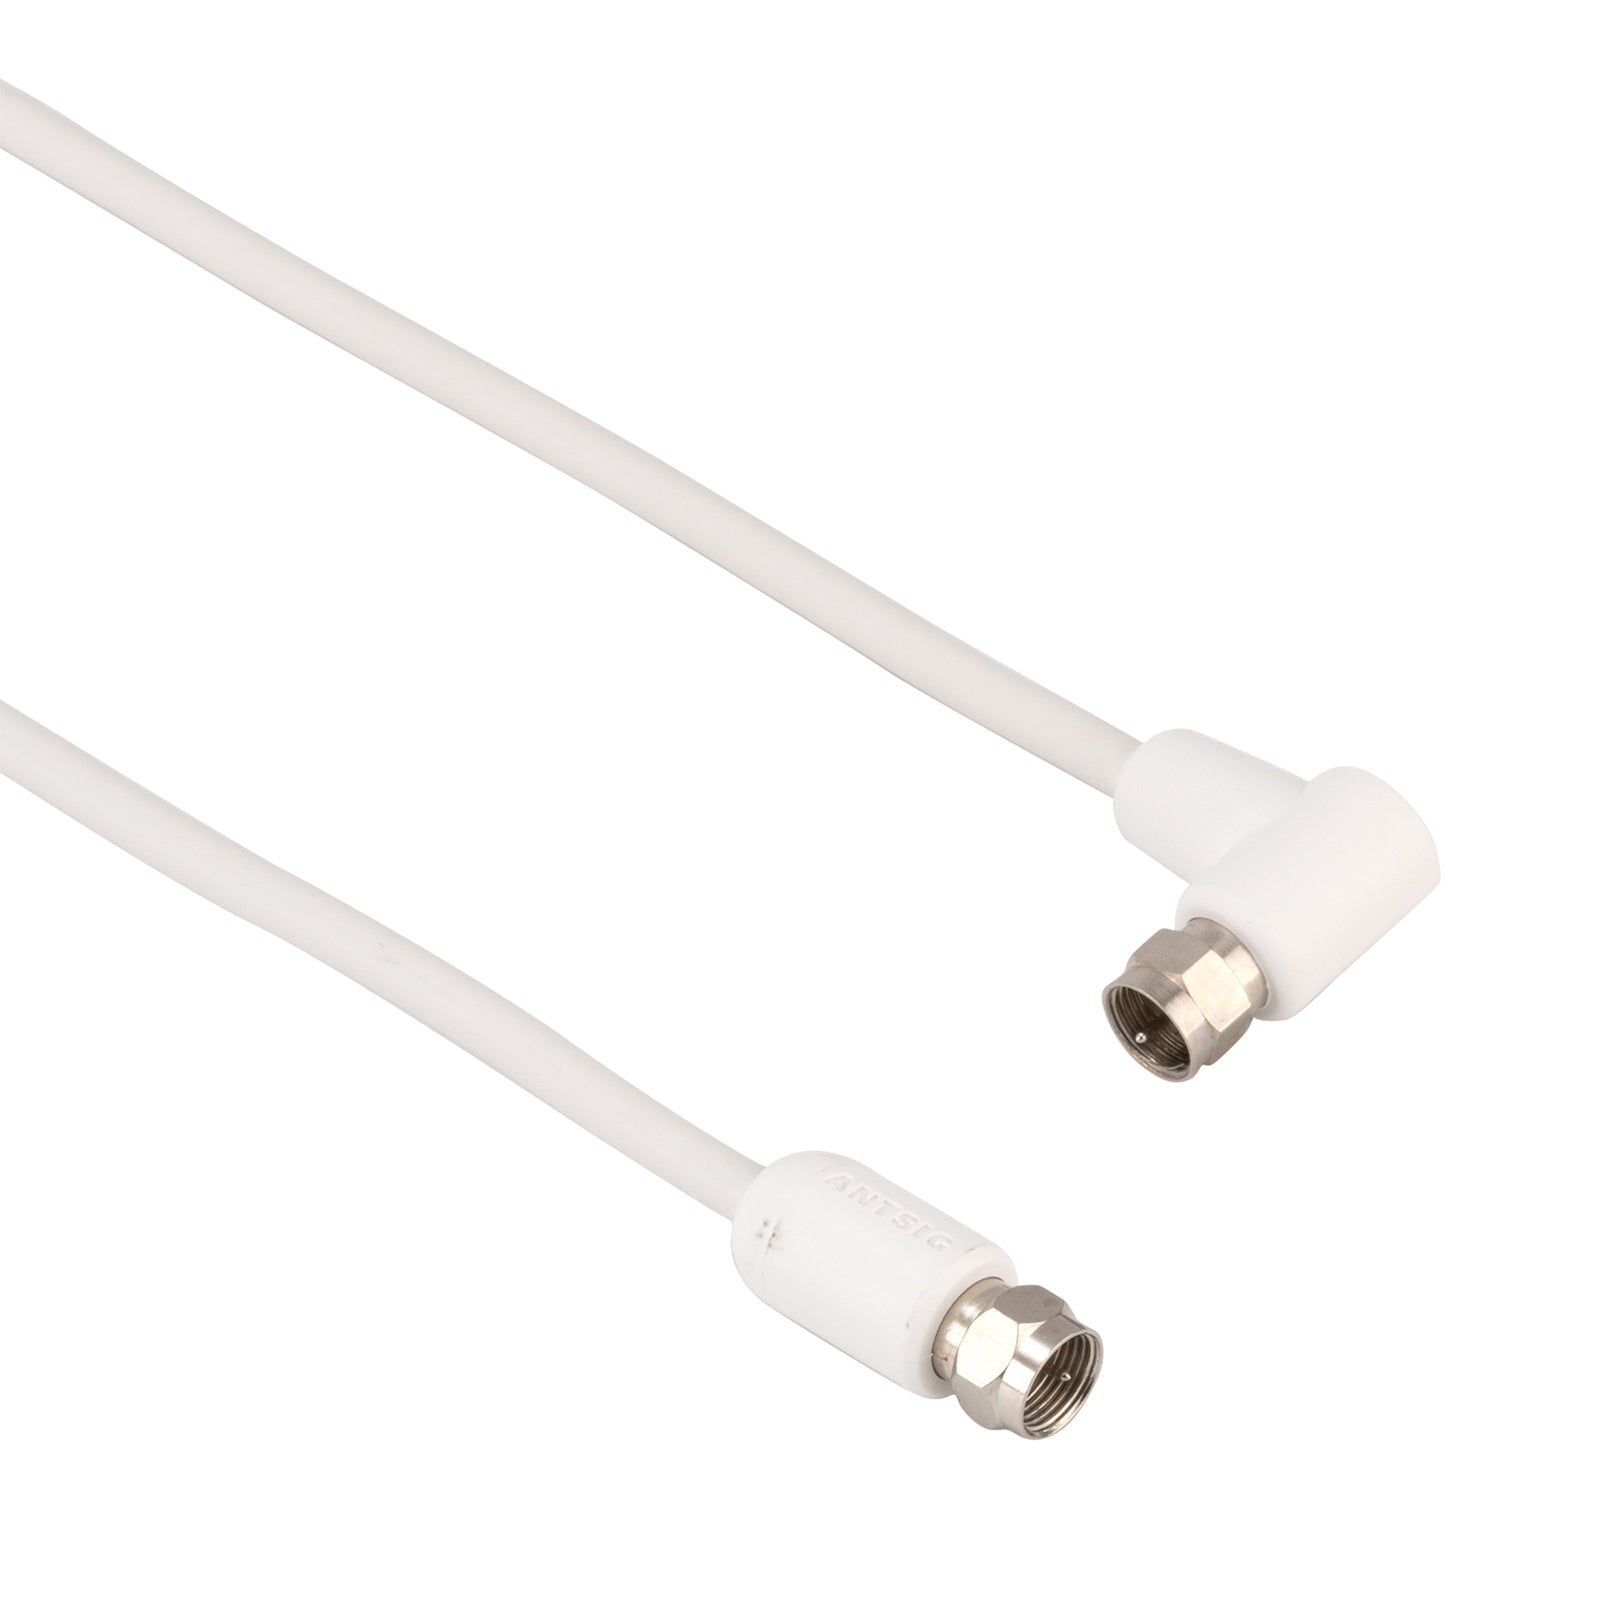 2m White Right Angle F-Type Male Antenna Cable Accessory